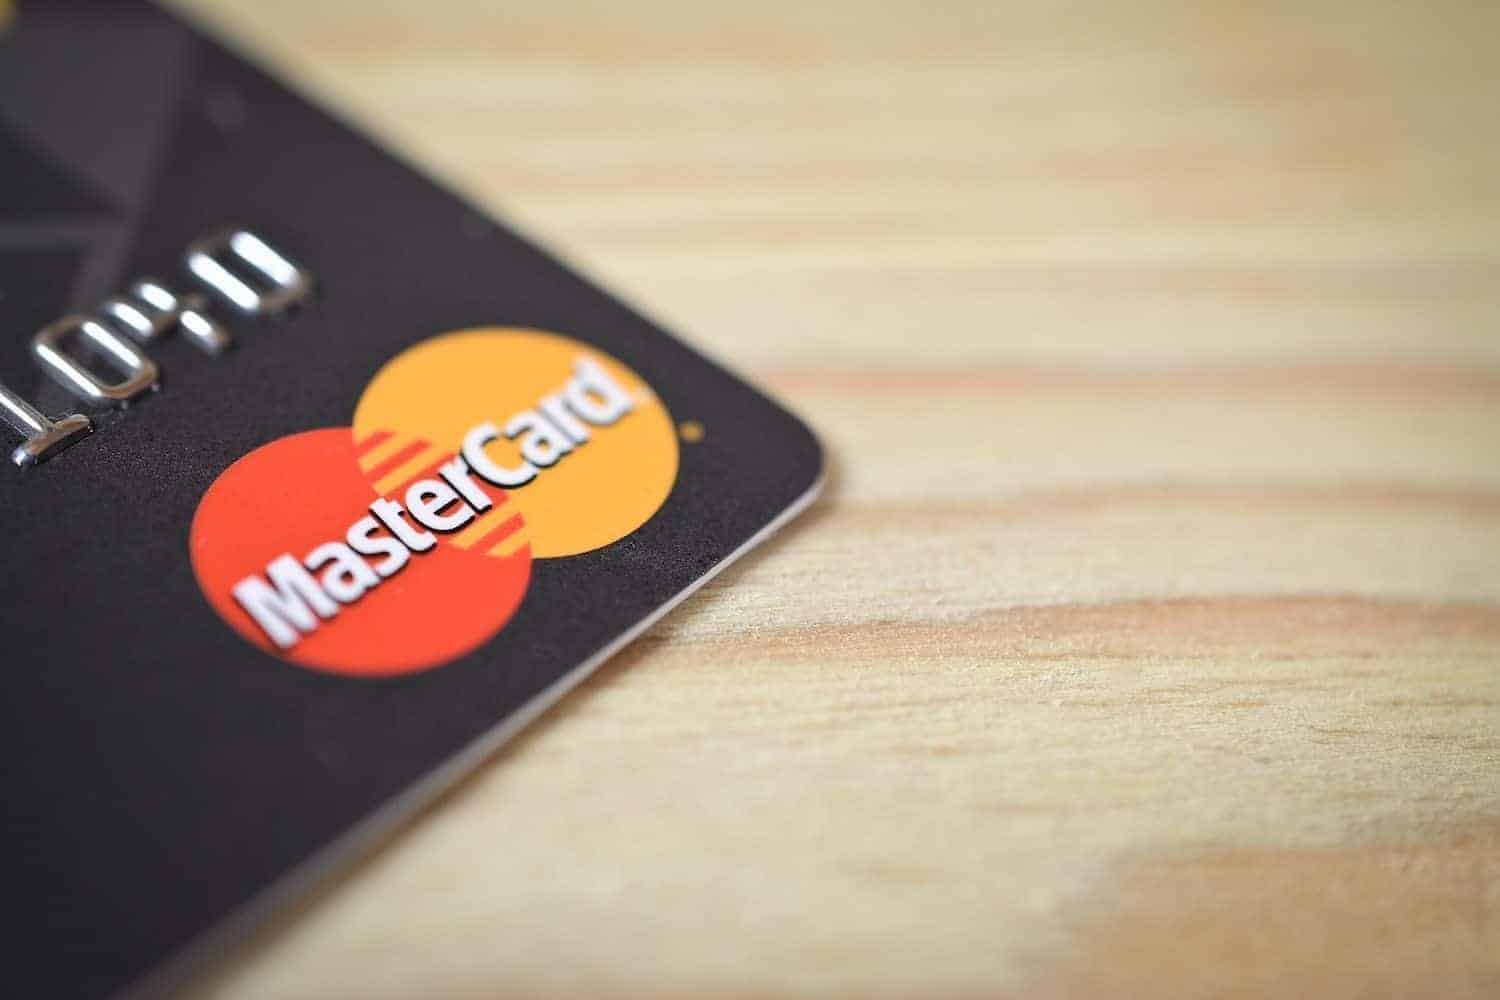 Mastercard Eyes Cryptocurrency Refunds in New Patent ...